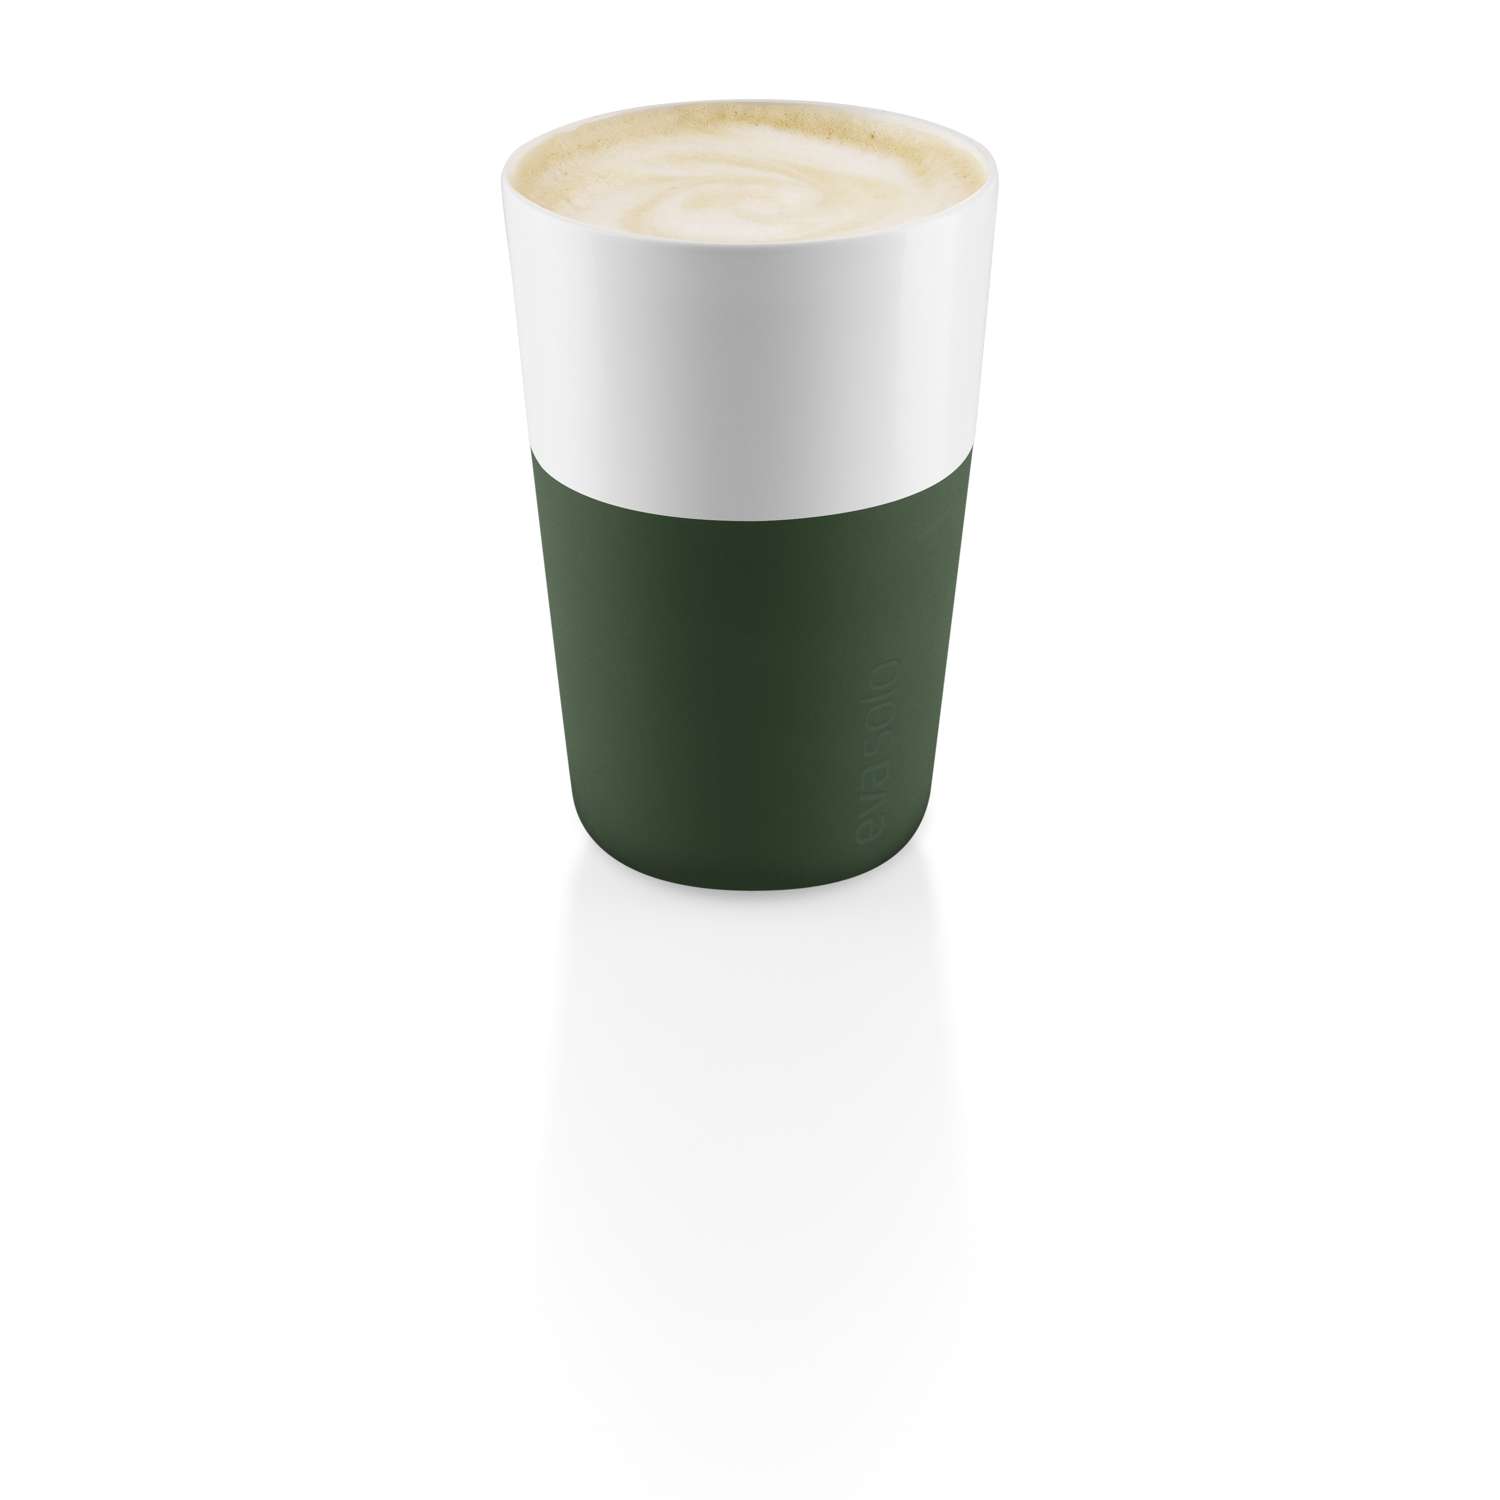 https://www.evasolo.com/%2FFiles%2FImages%2FPlytix%2FProduct_Photo_4%2F501131_Cafe_latte_tumblers_full_B_Emerald_Green_aRGB_High.jpg